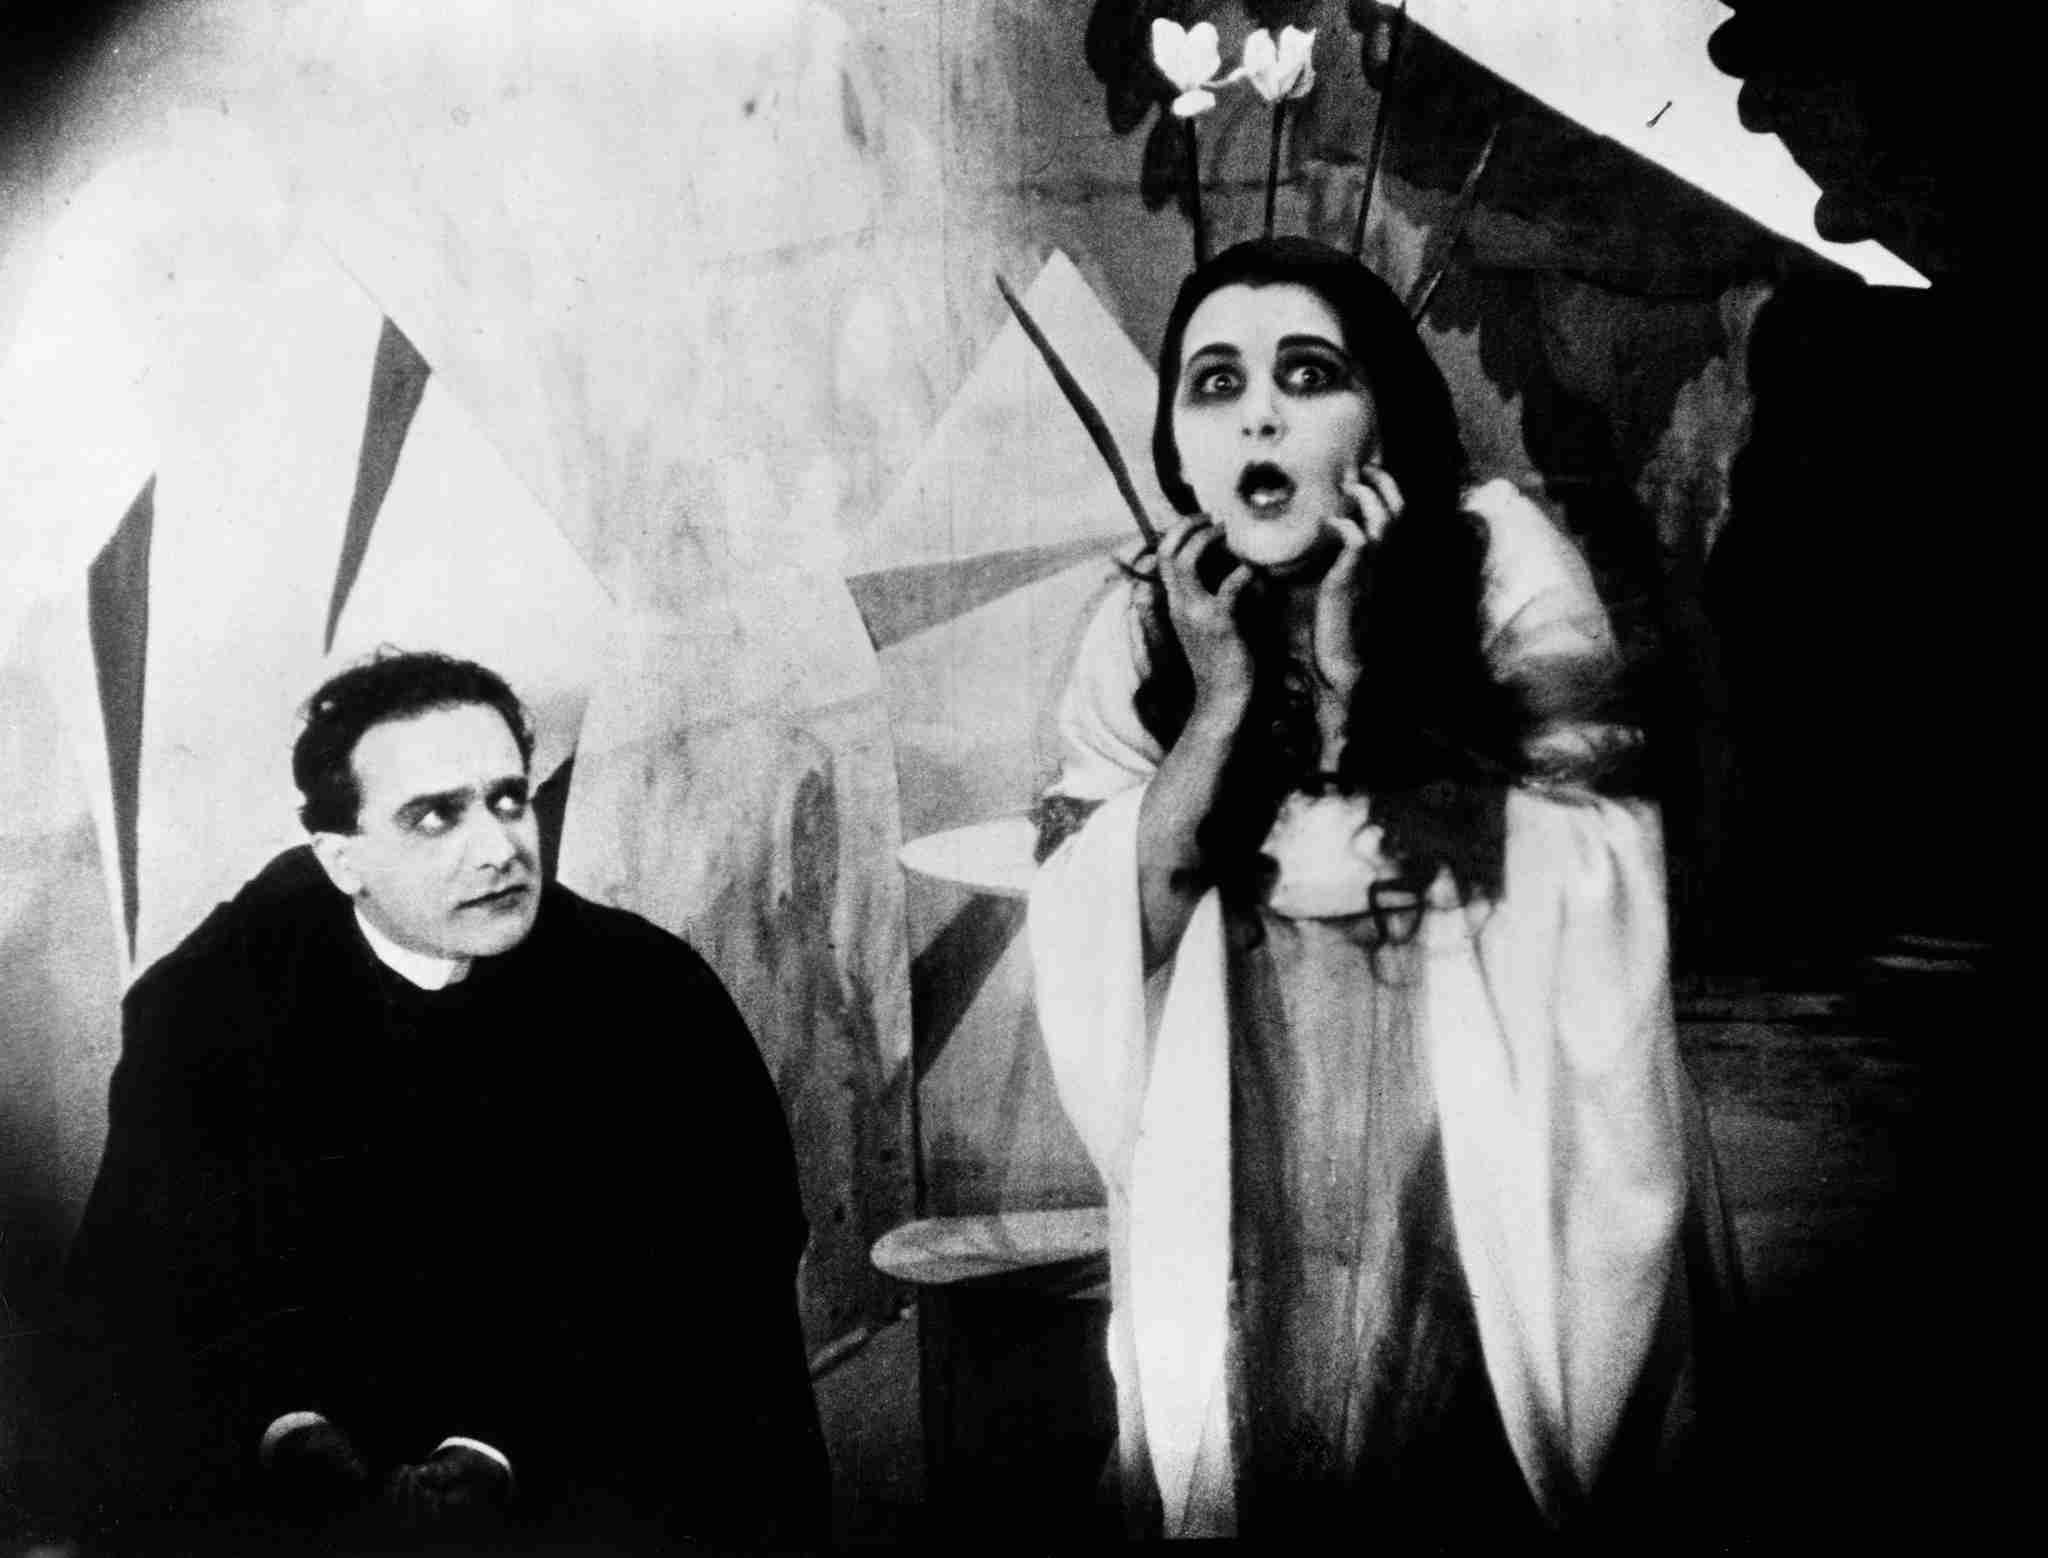 The-Cabinet-of-Dr-Caligari-(1920)